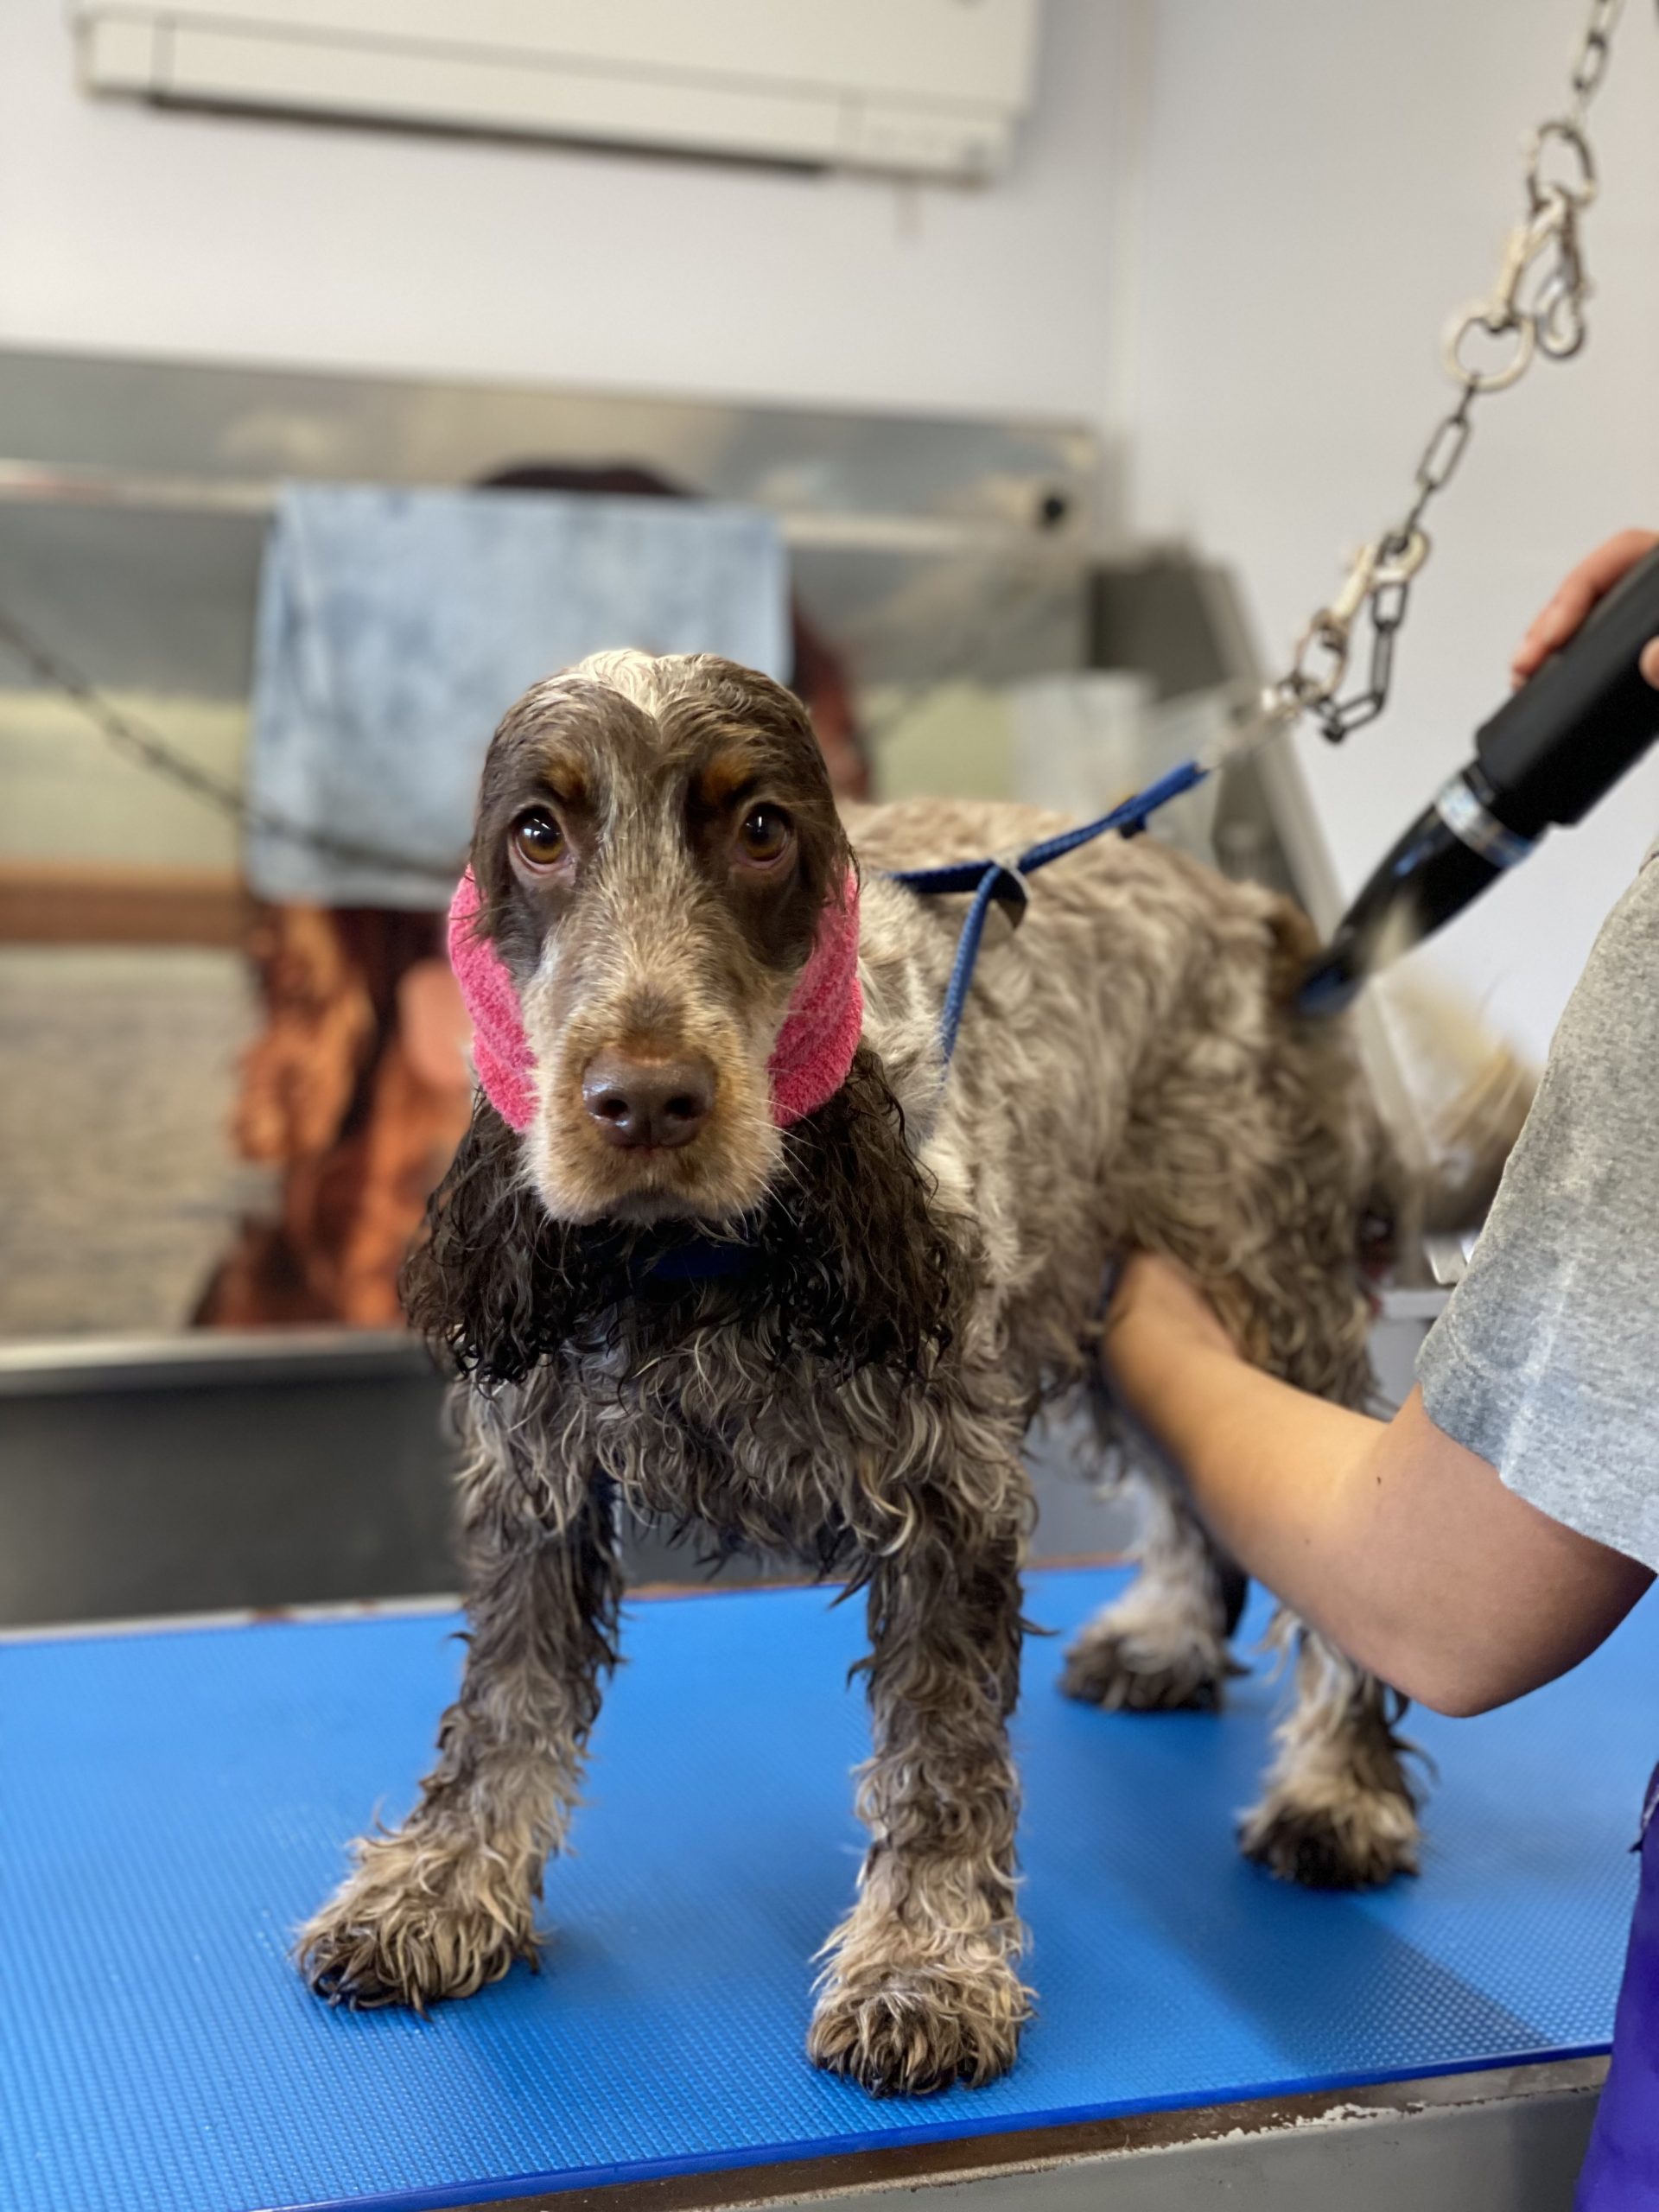 how to become a dog groomer